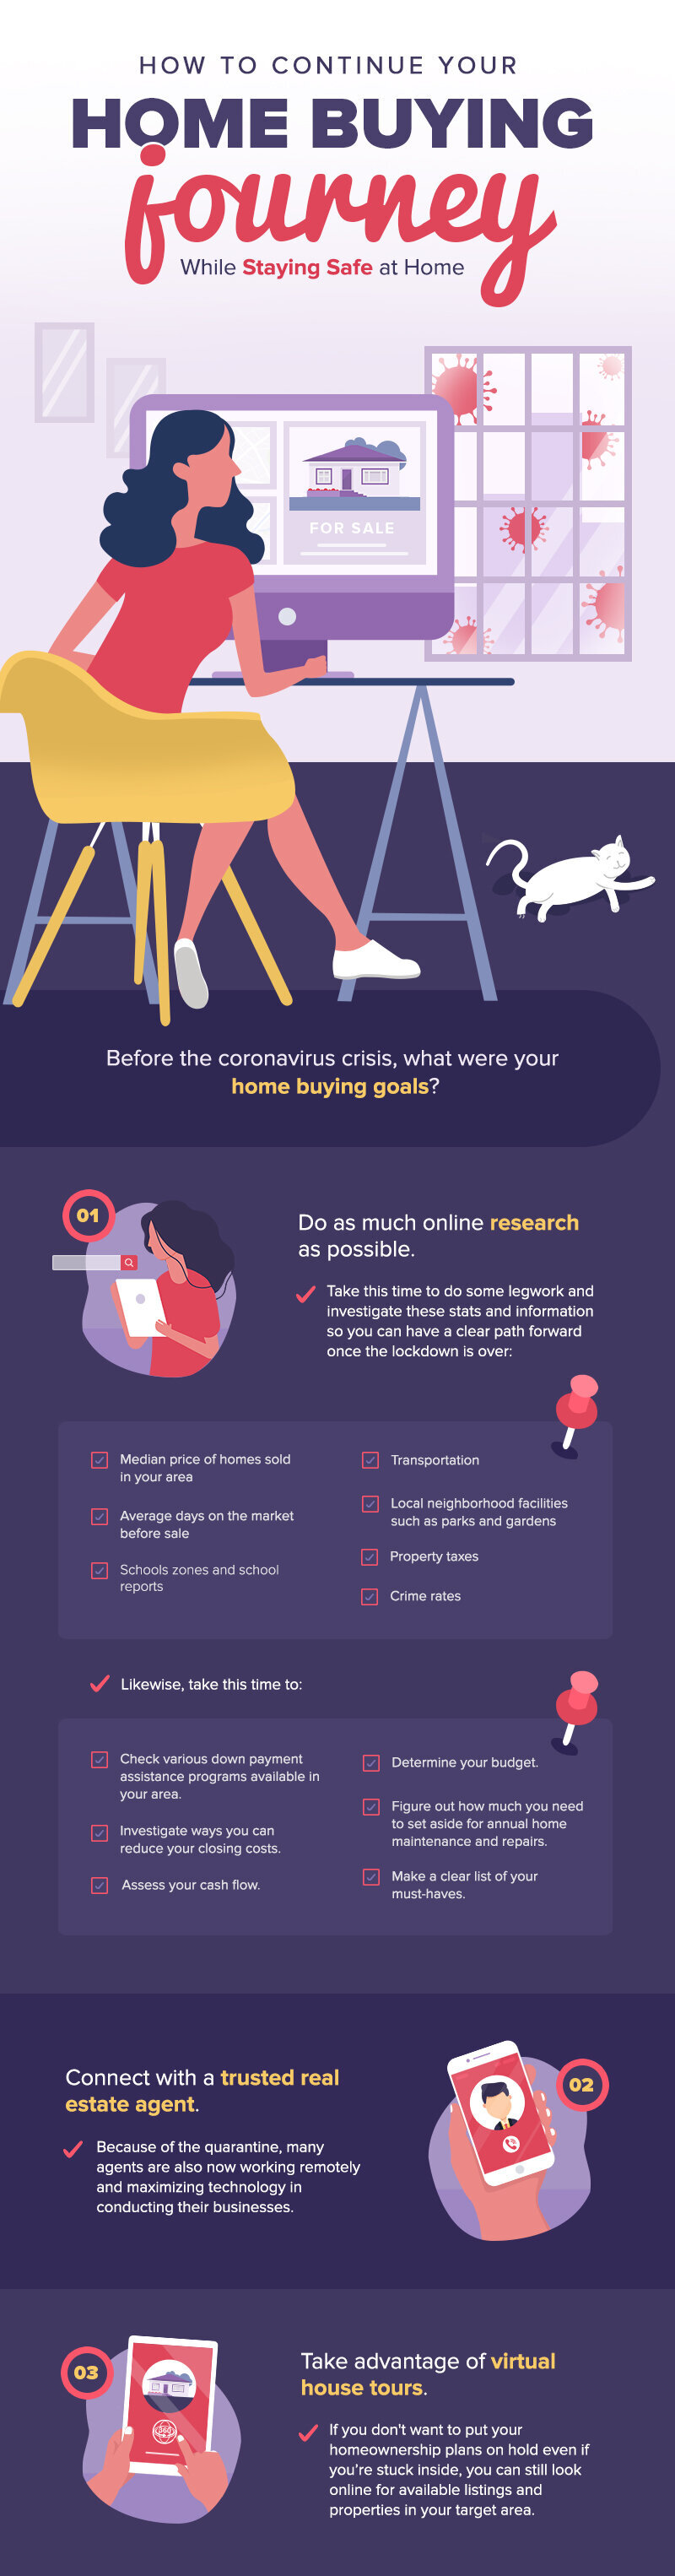 How to Continue Your Home Buying Journey While Staying Safe at Home